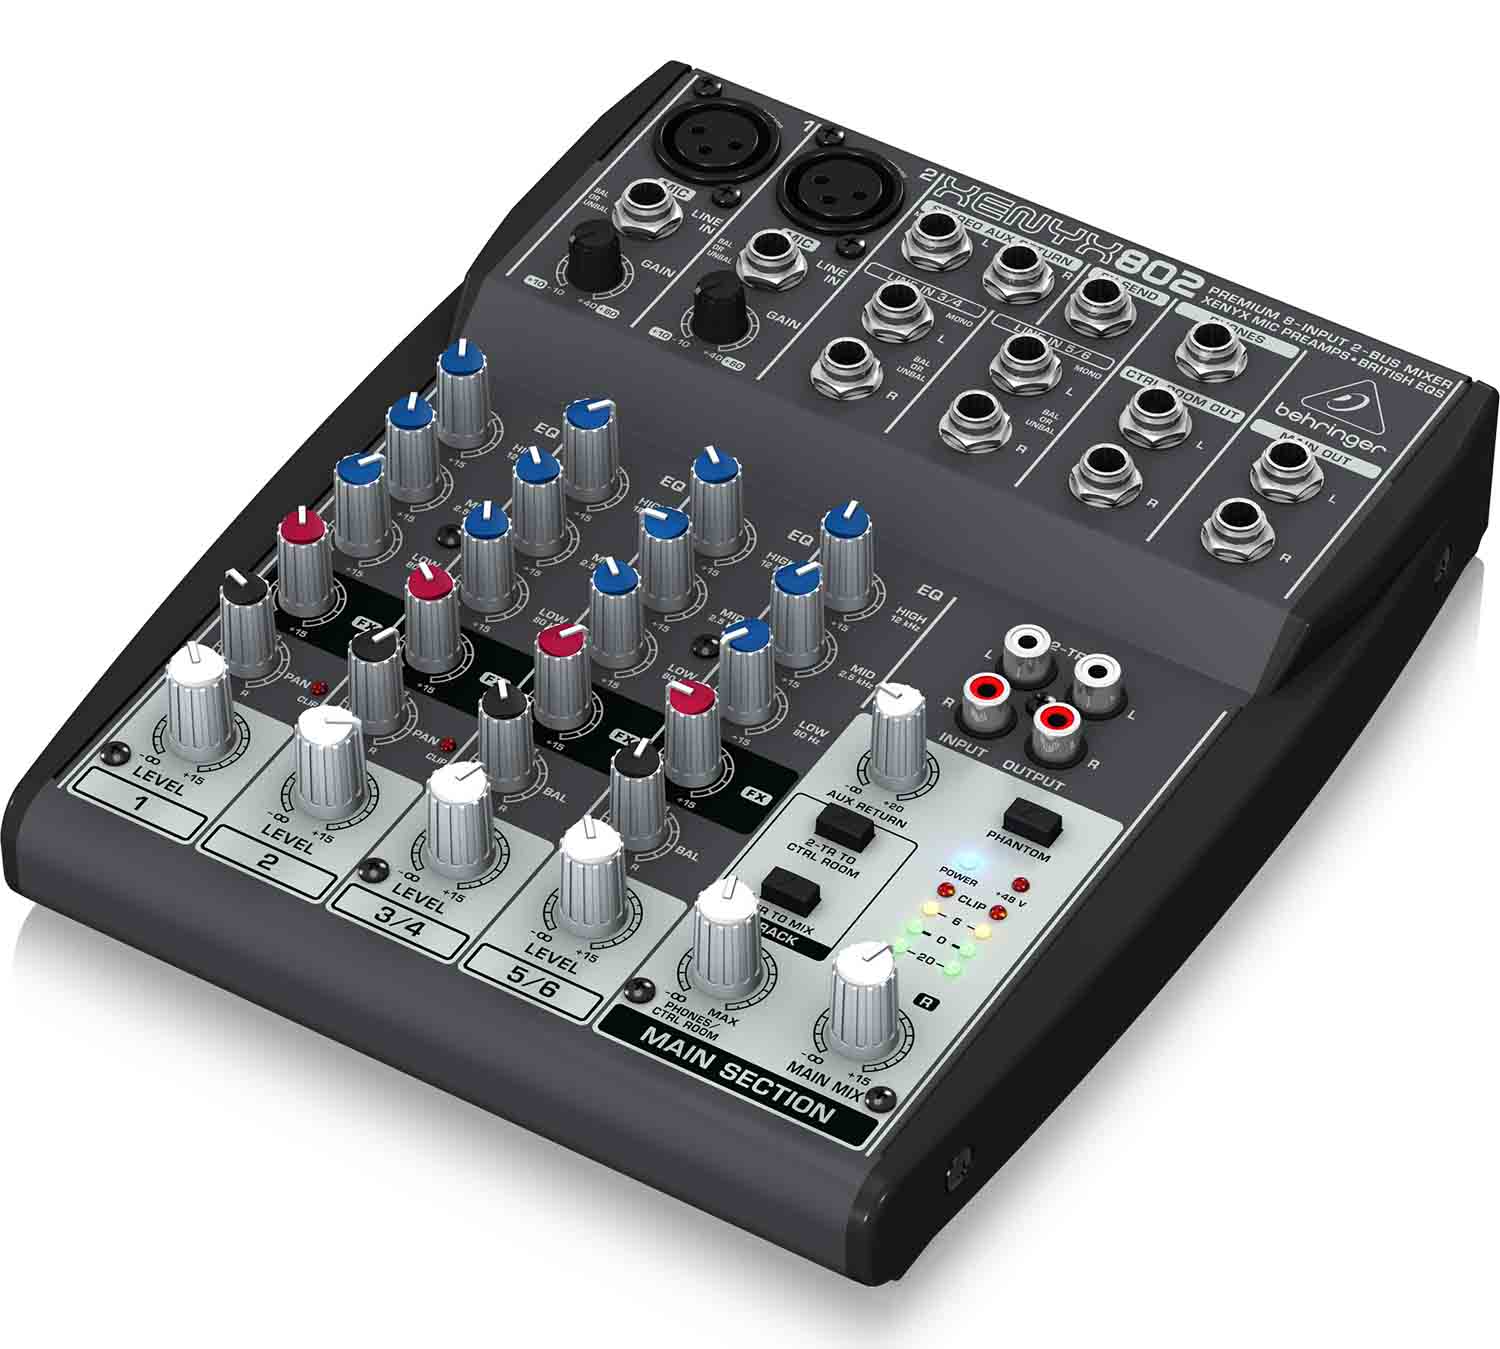 Behringer Xenyx 802, 8-Input 2-Bus Mixer With XENYX Mic Preamps